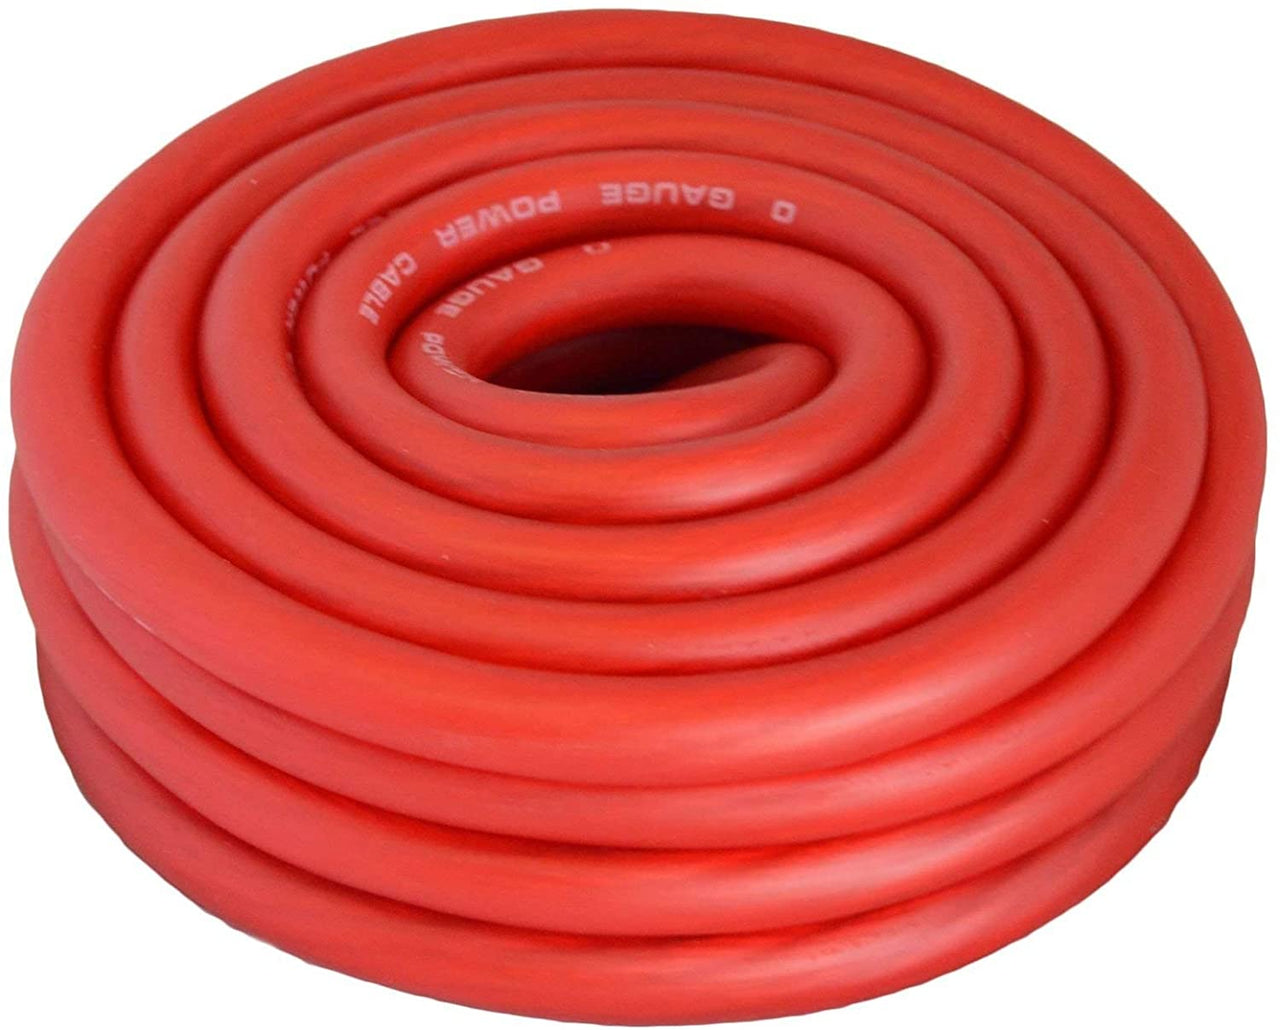 Absolute USA 1/0 Gauge 50 Feet Red<br/>1/0 Gauge 50 FT PRO Xtreme Twisted Power Ground Battery Wire Cables Red